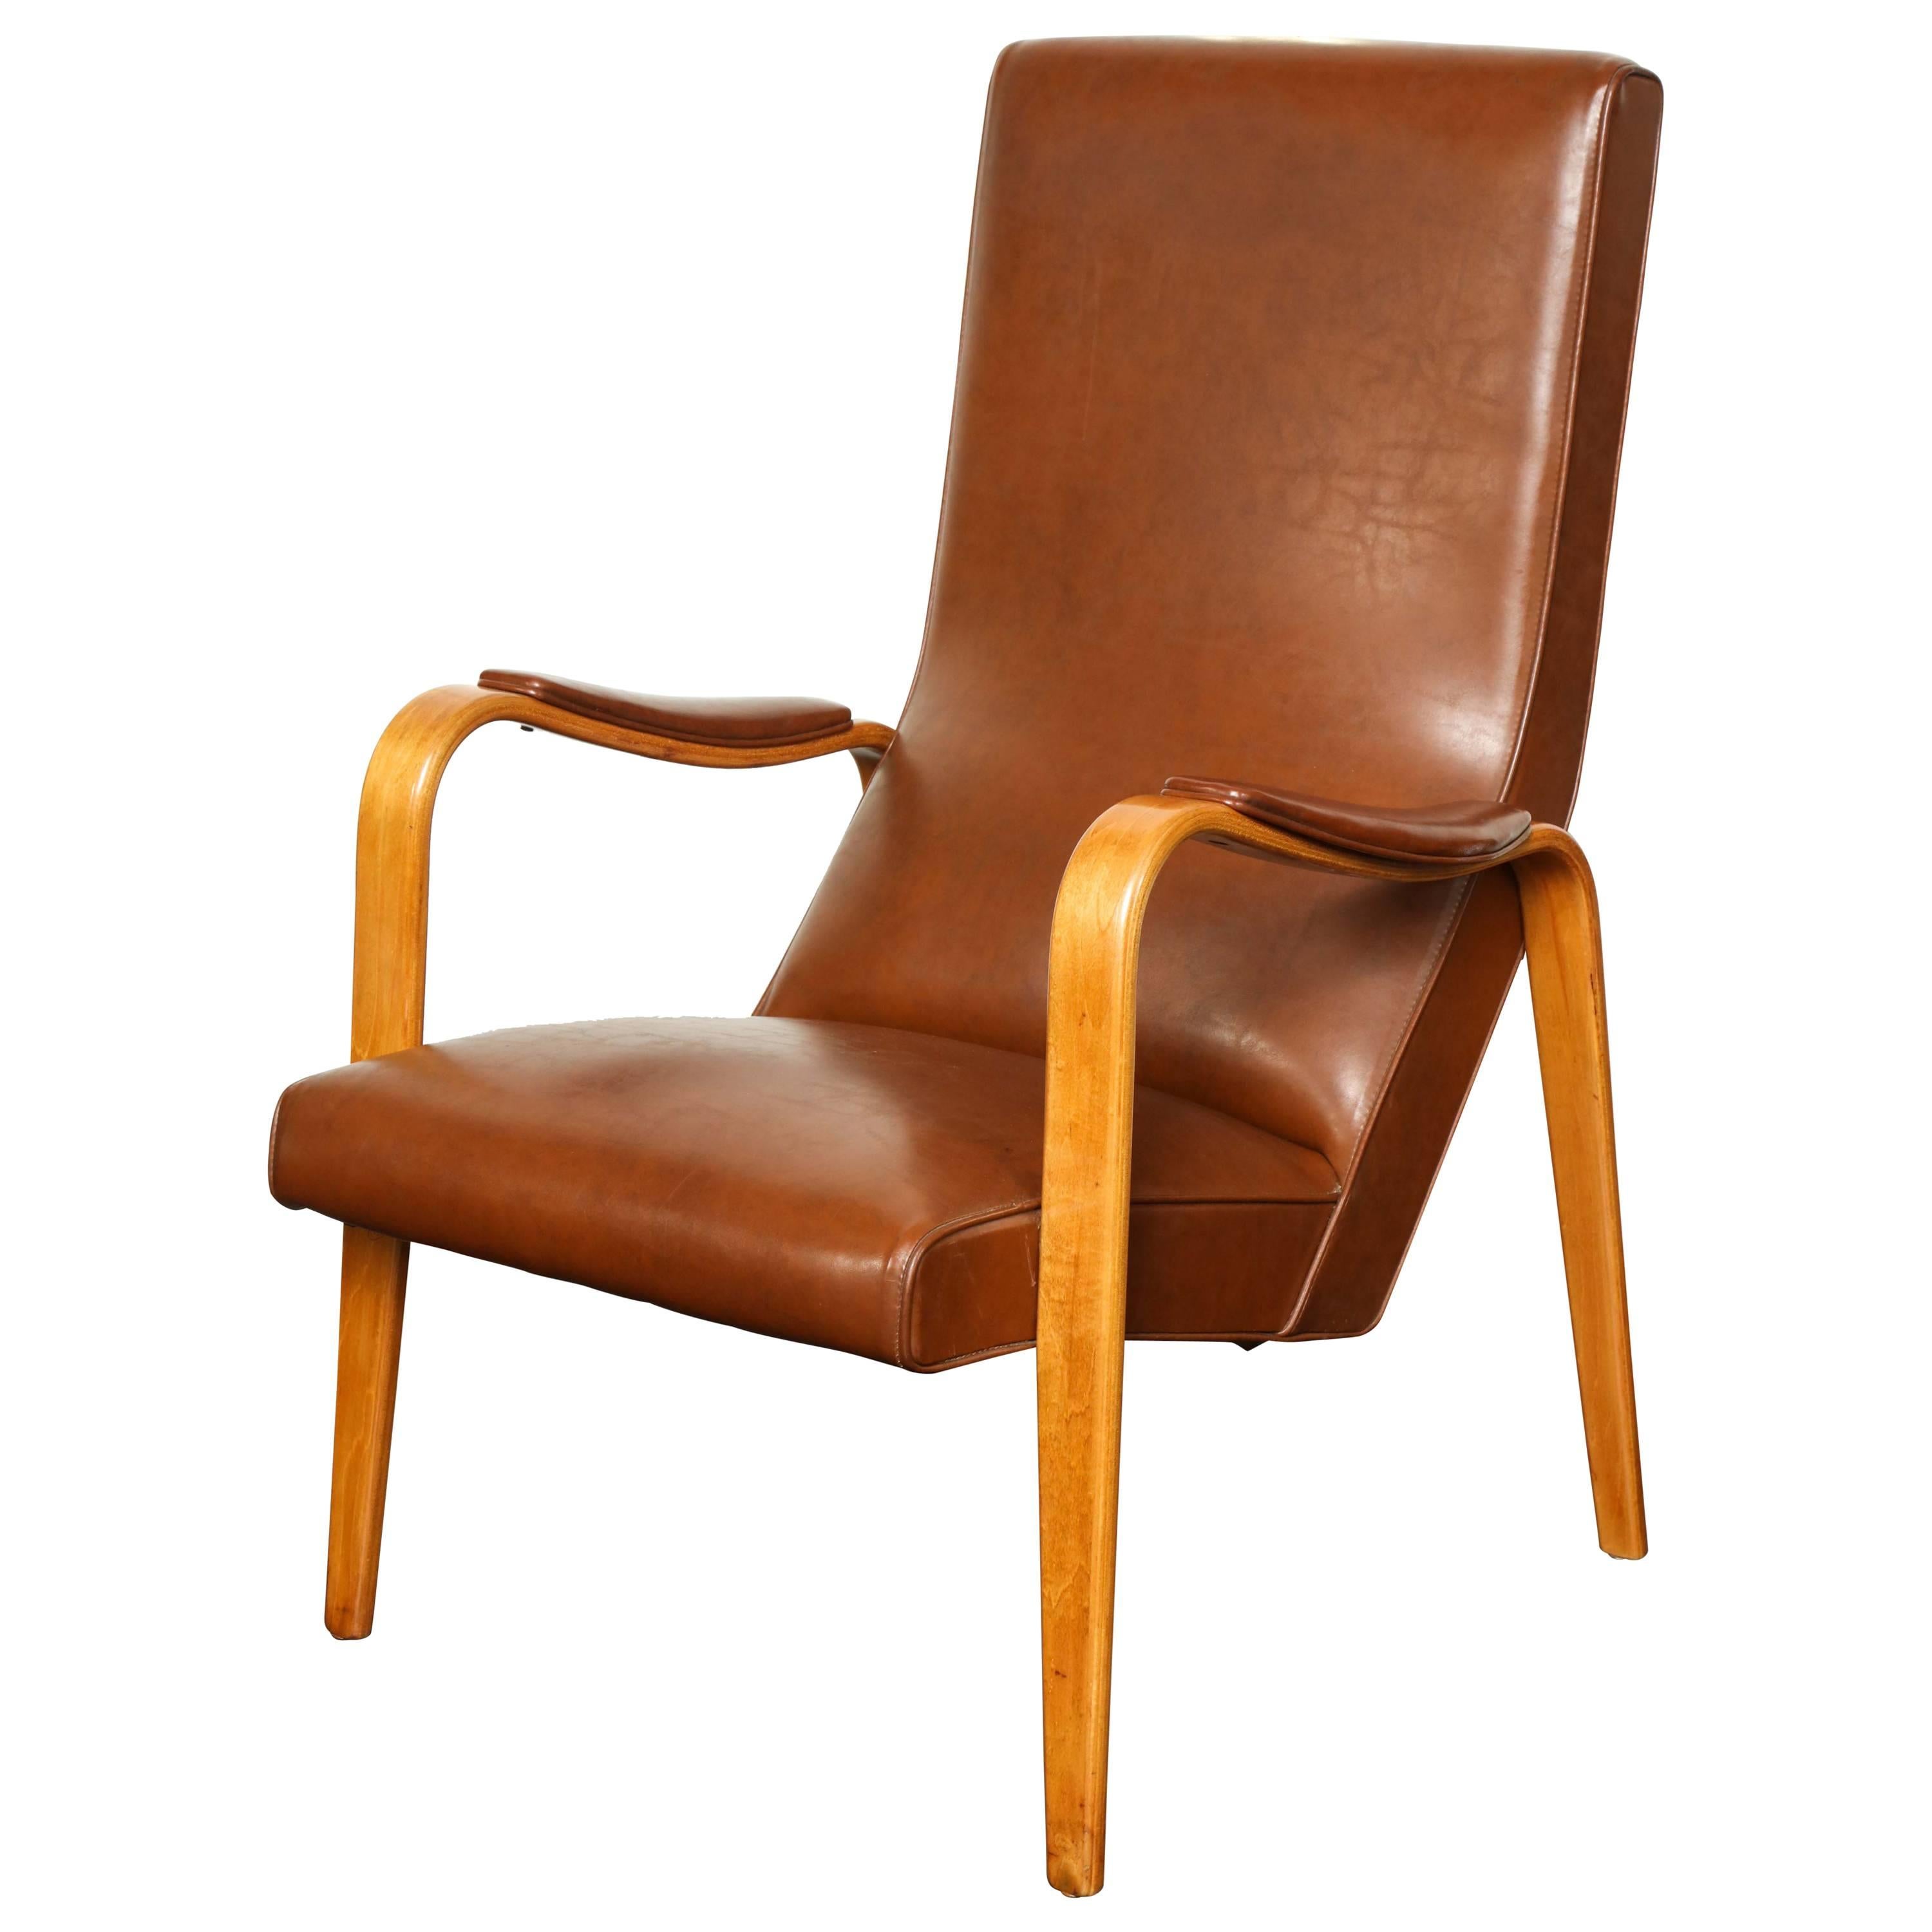 Mid-20th Century Walnut and Leather Open Armchair For Sale